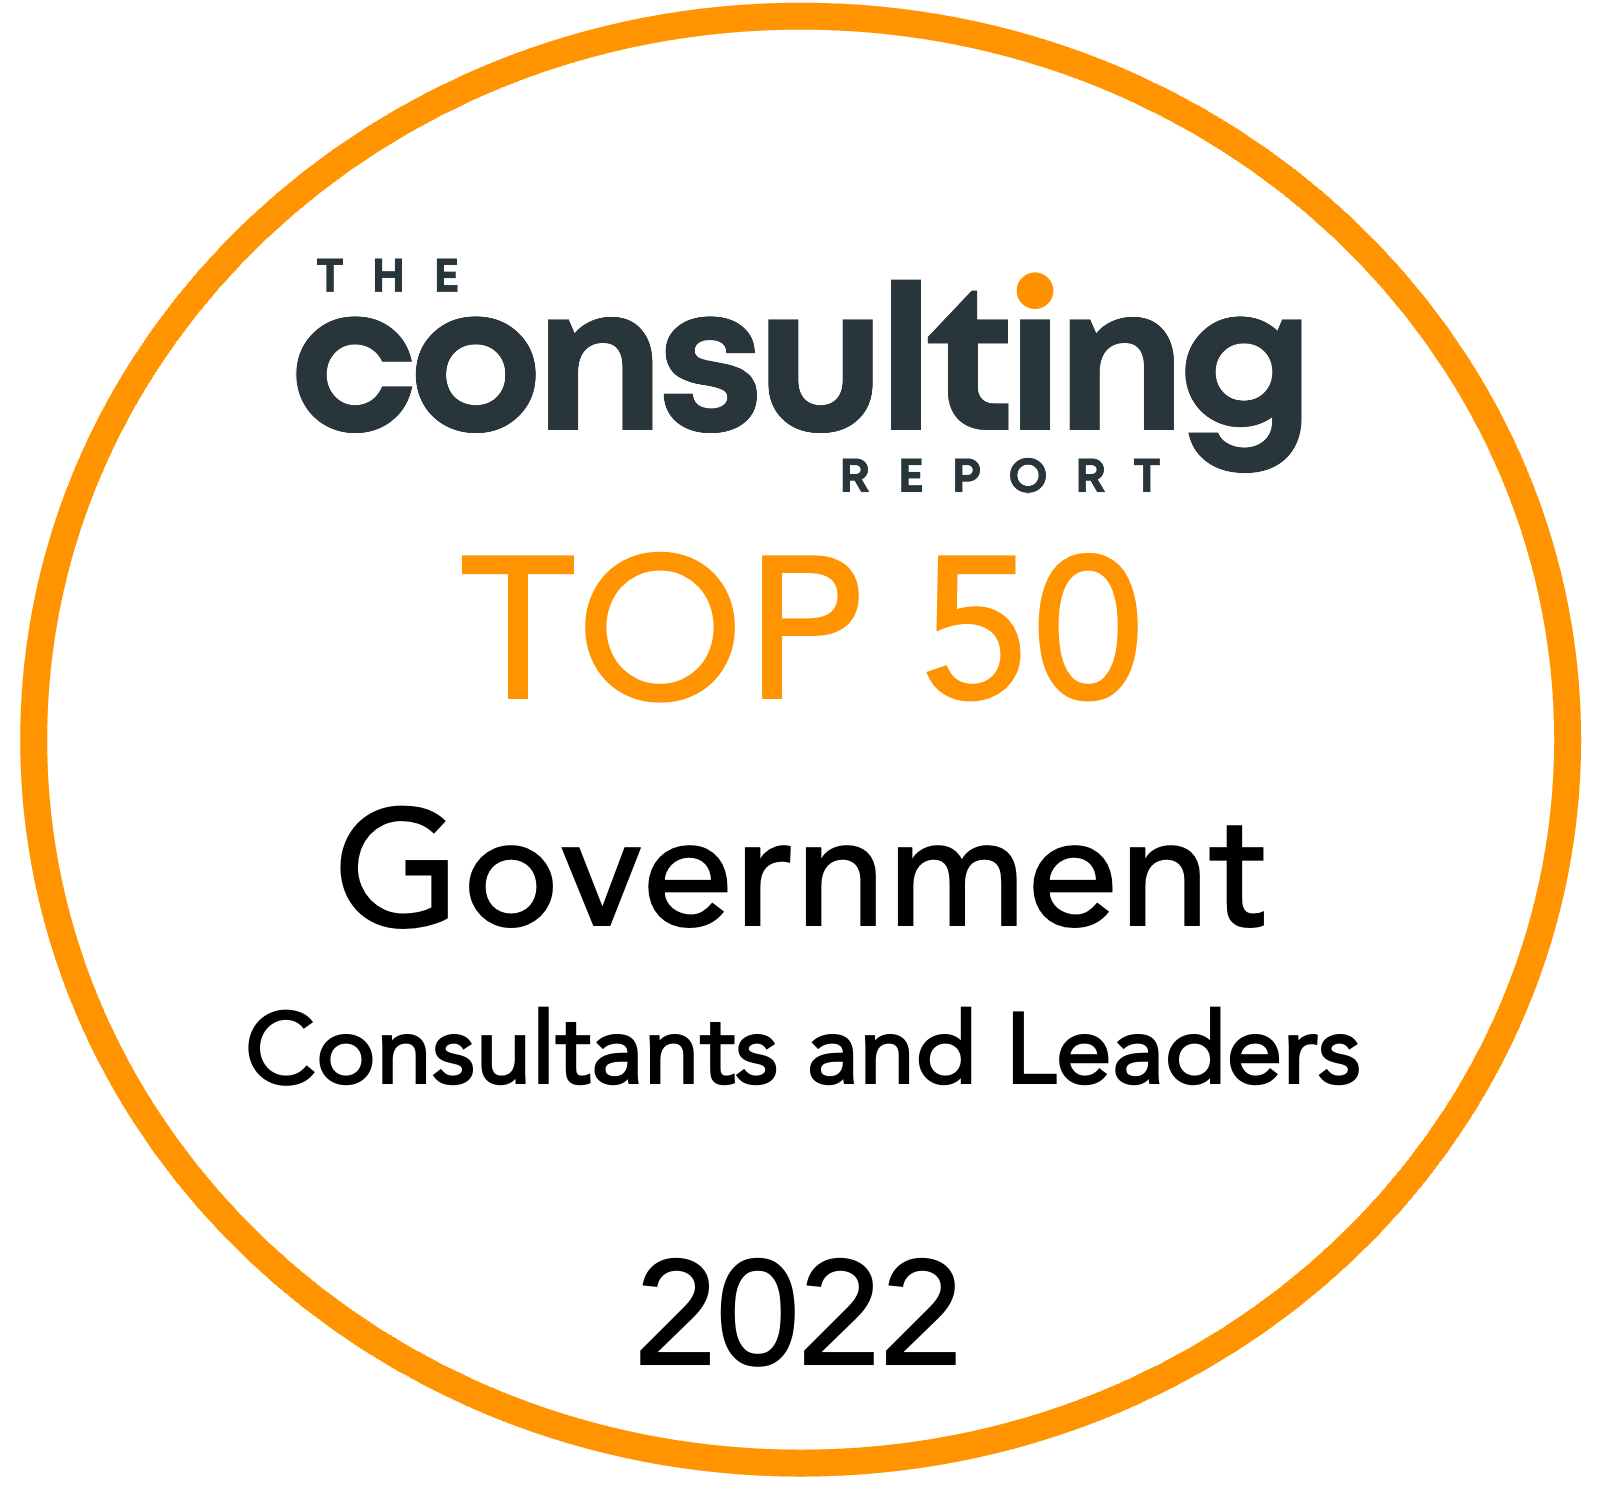 The Consulting Report top 50 award